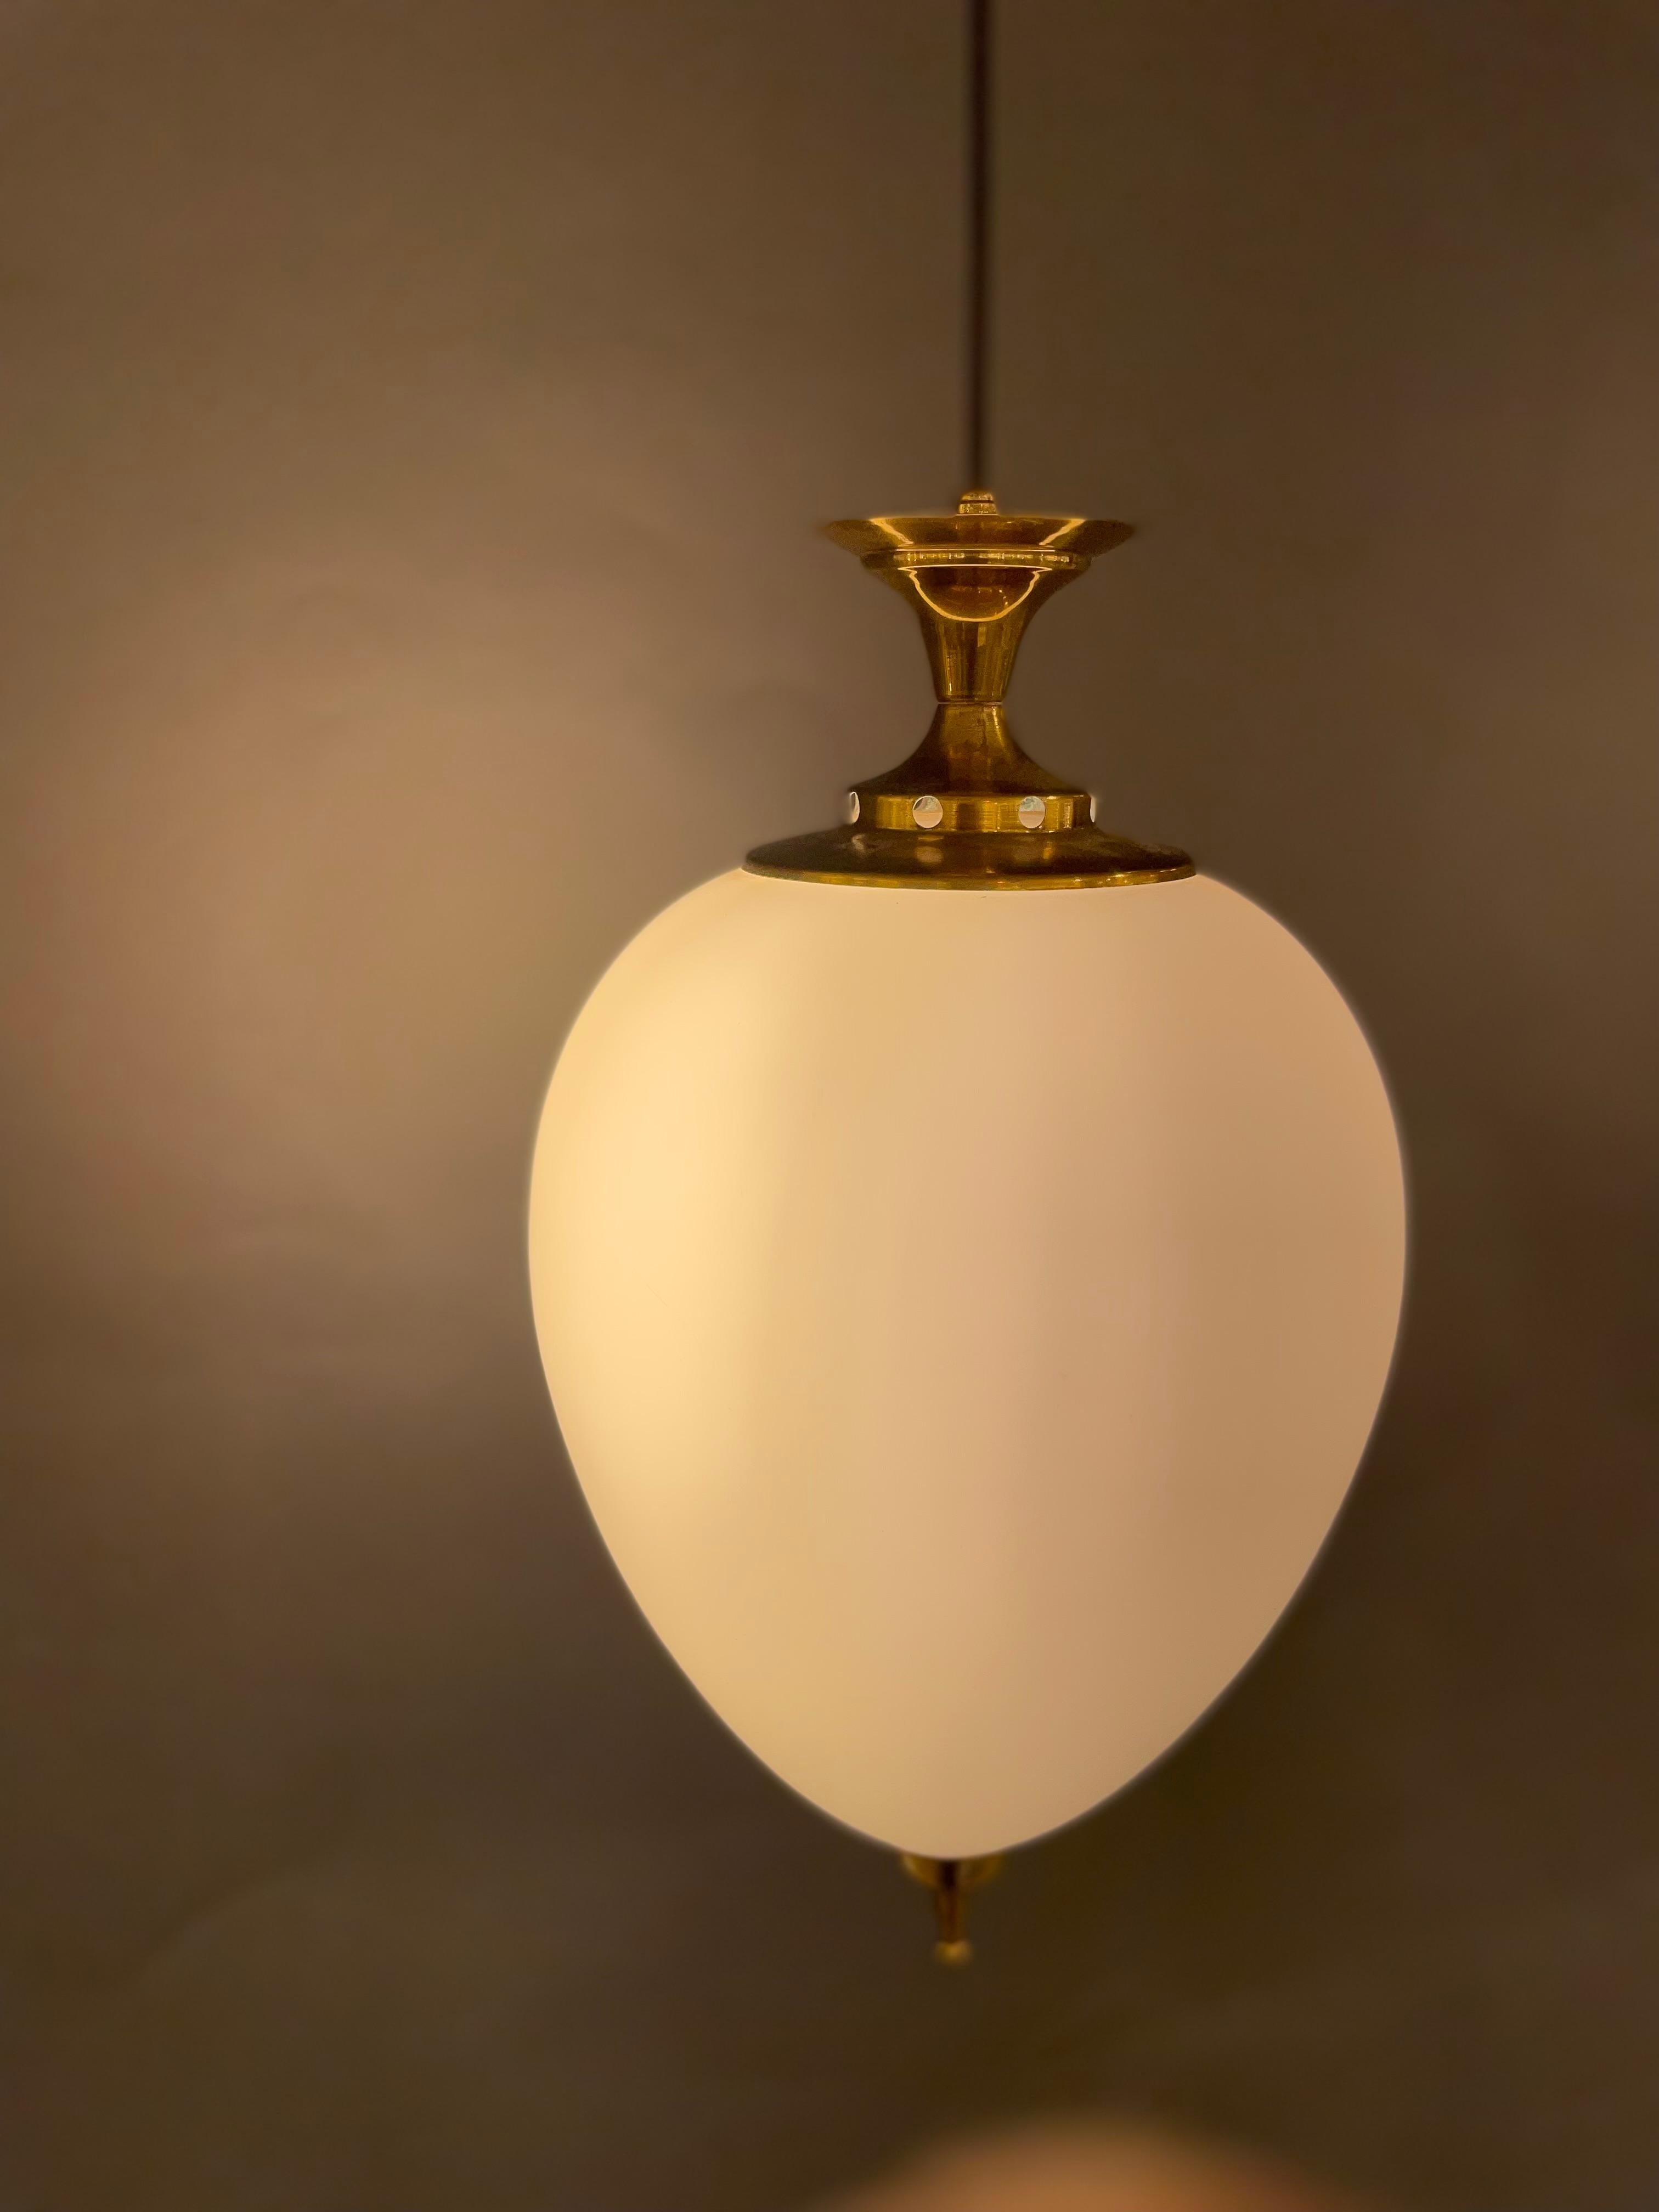 An elegant Italian hanging lamp in brass and murano glass in the style of Fontana Arte. Circa 1950s.